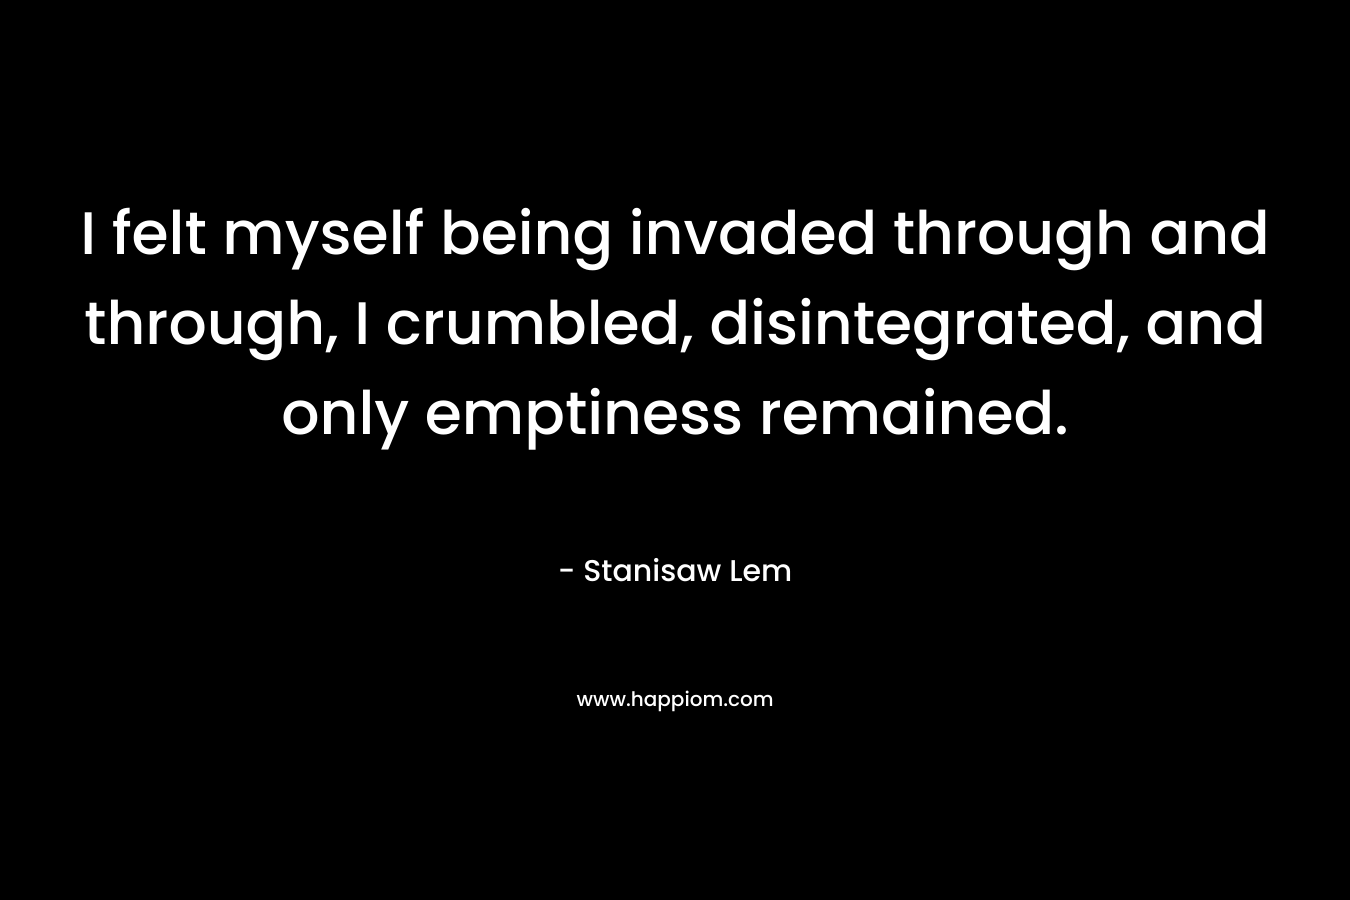 I felt myself being invaded through and through, I crumbled, disintegrated, and only emptiness remained. – Stanisaw Lem